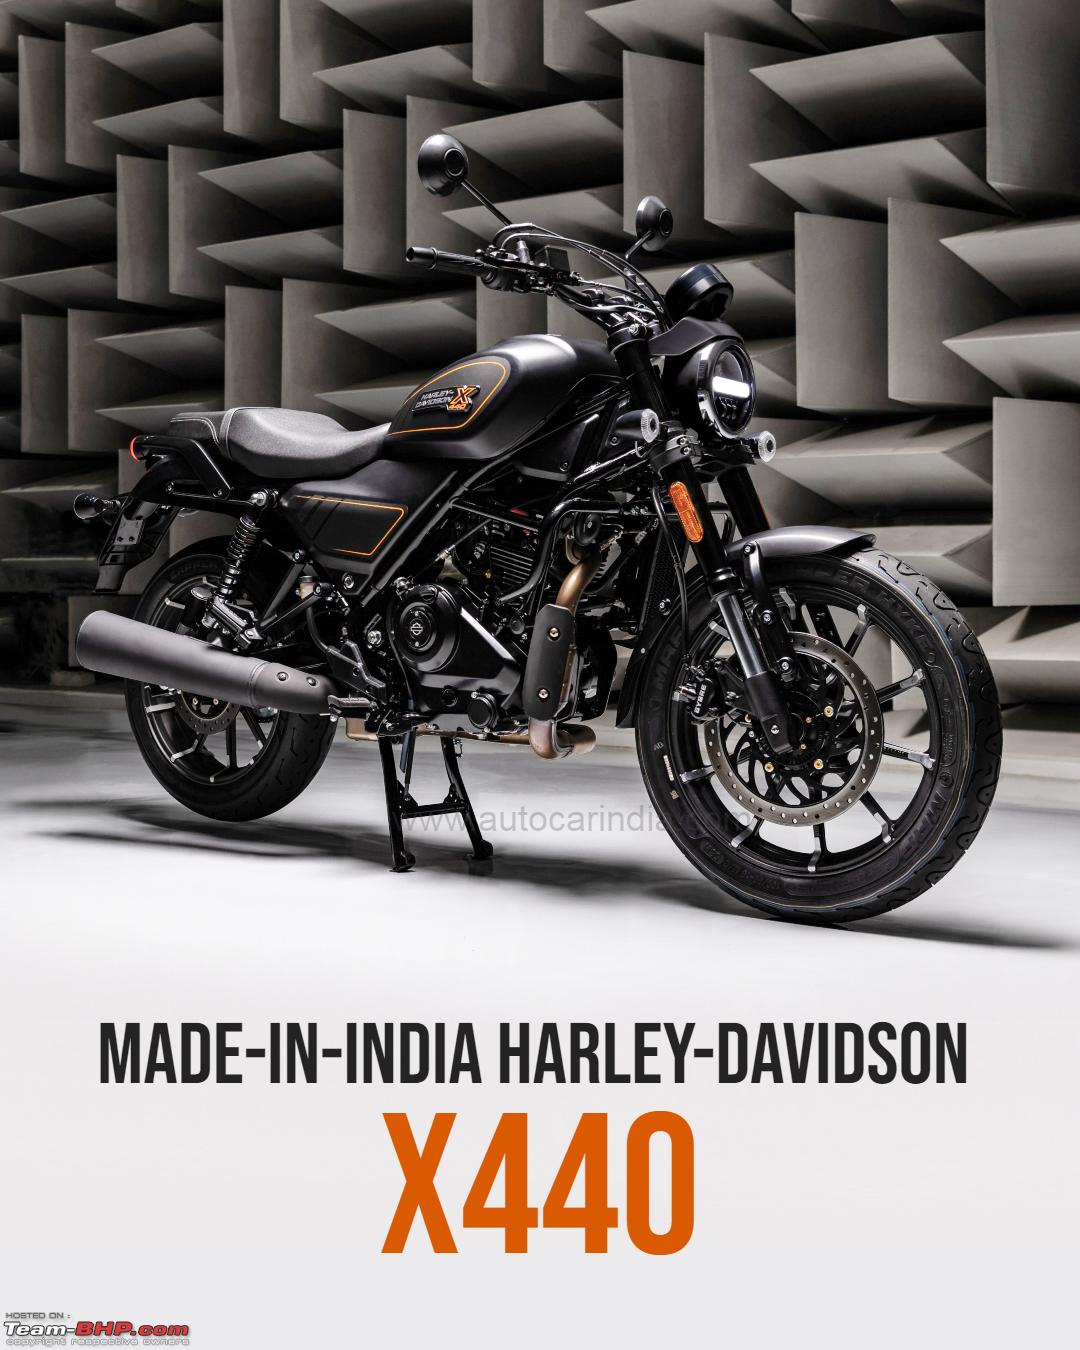 Harley-Davidson X440 Launch: Price, specifications, design and